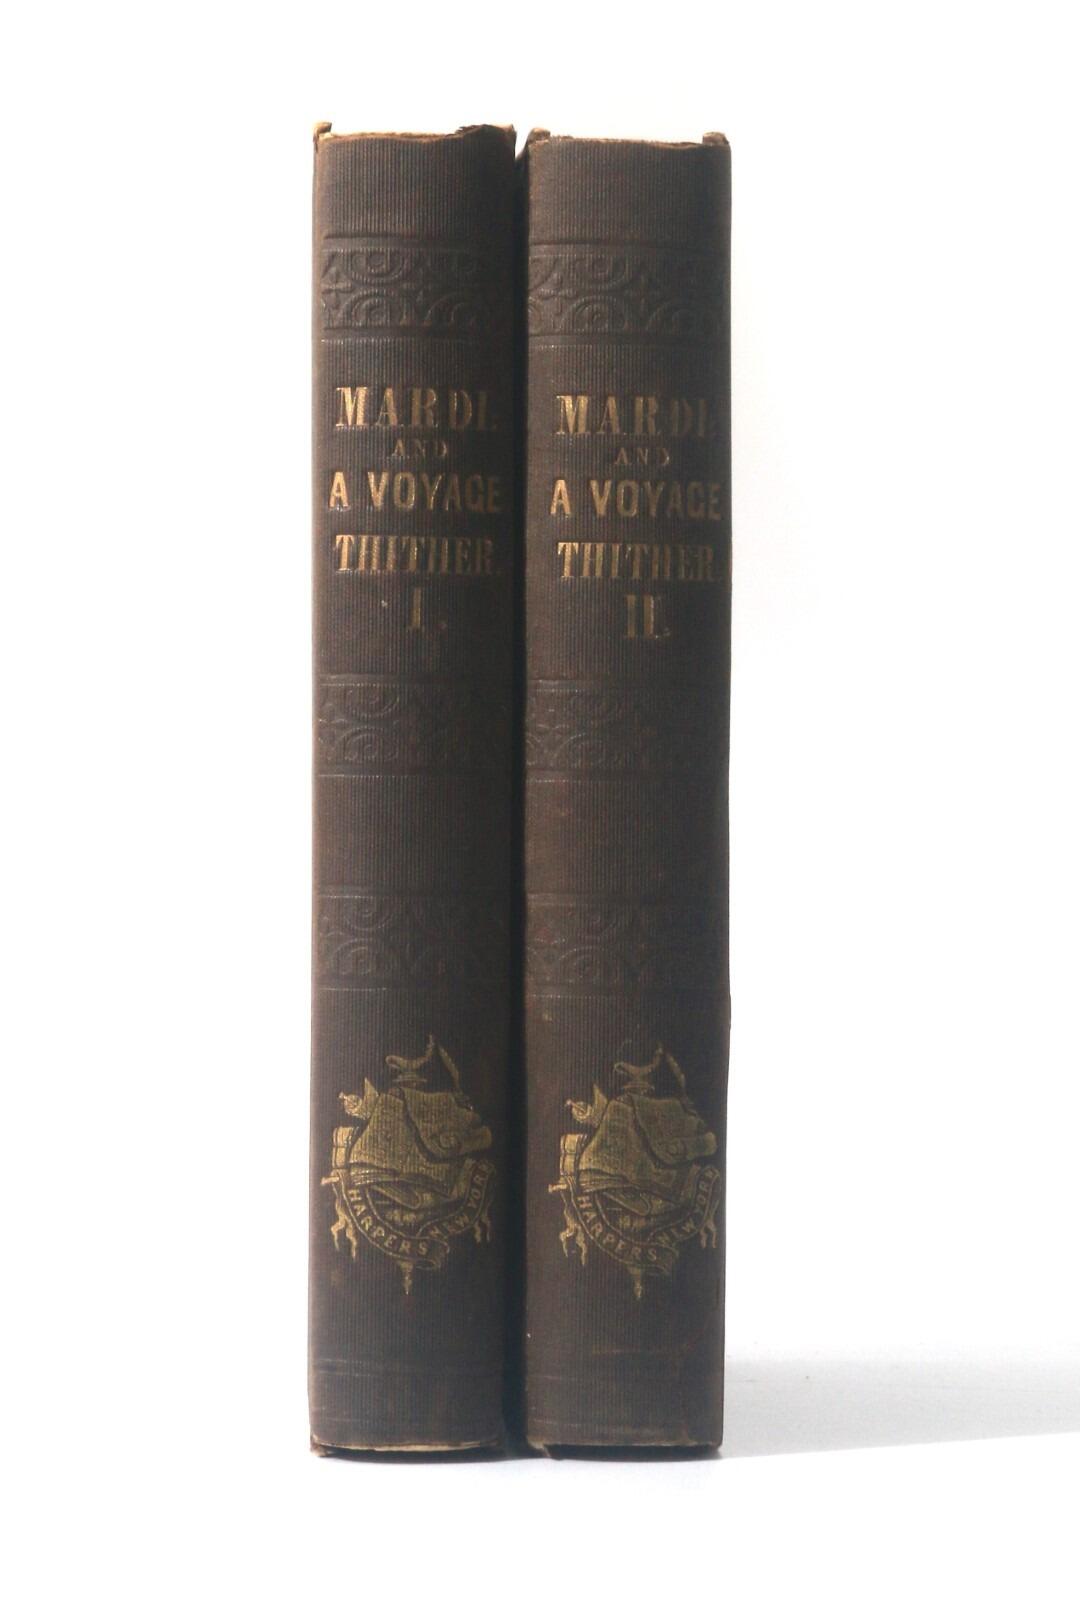 Herman Melville - Mardi: and a Voyage Thither - Harper & Brothers, 1849, First Edition.